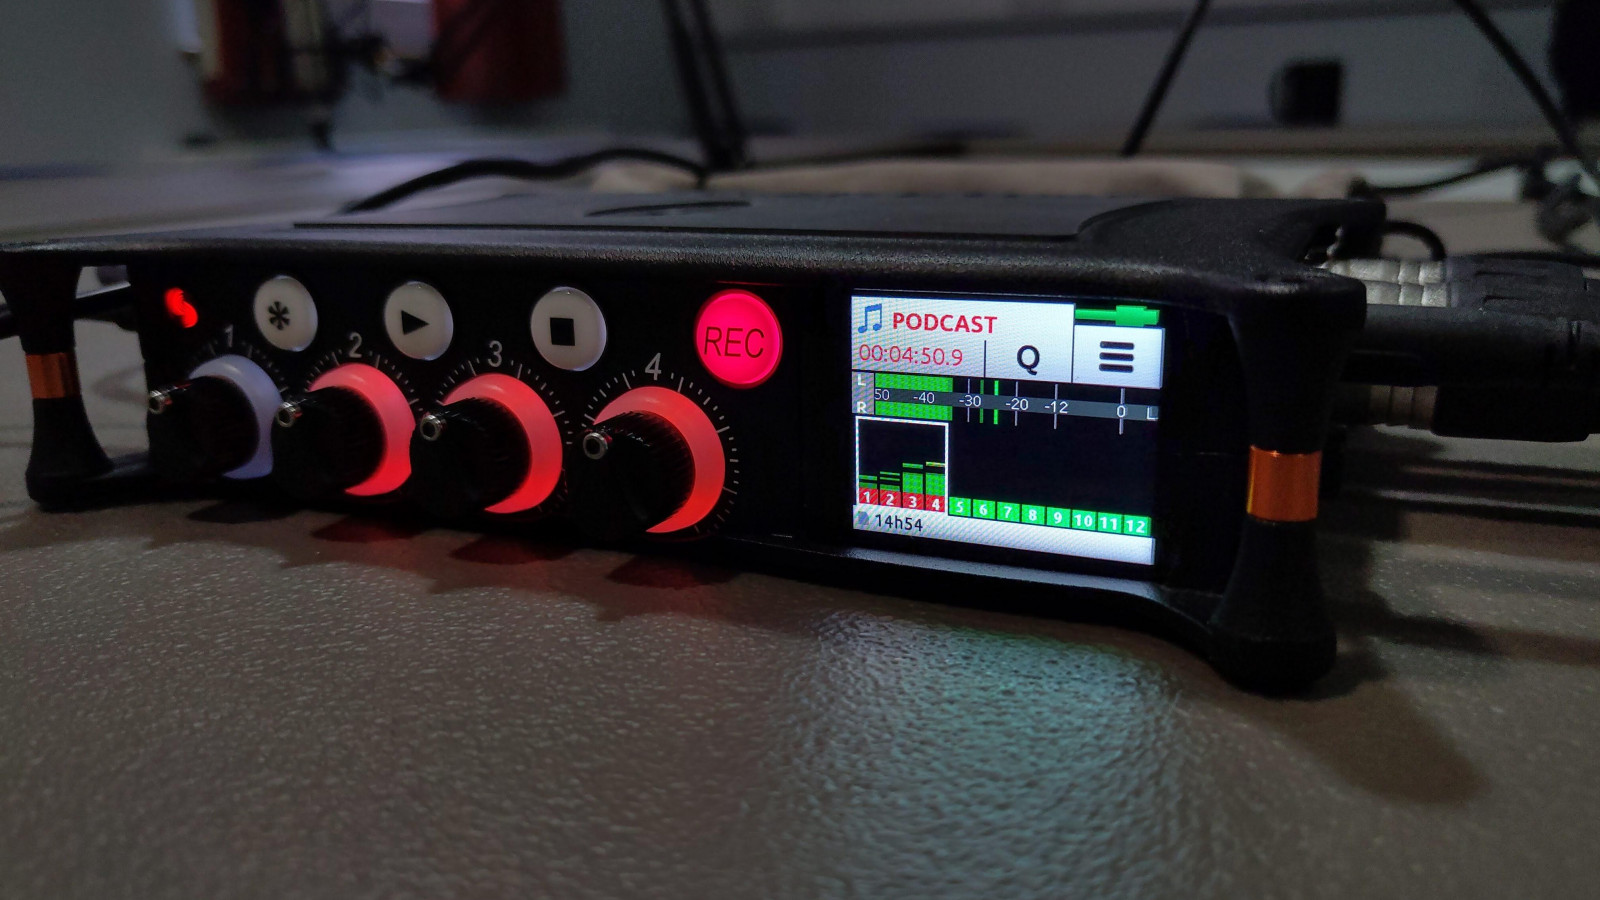 Recording equipment placed on a table. Its digital display is a small white screen containing information in black, green and red. The machine's buttons are illuminated red.